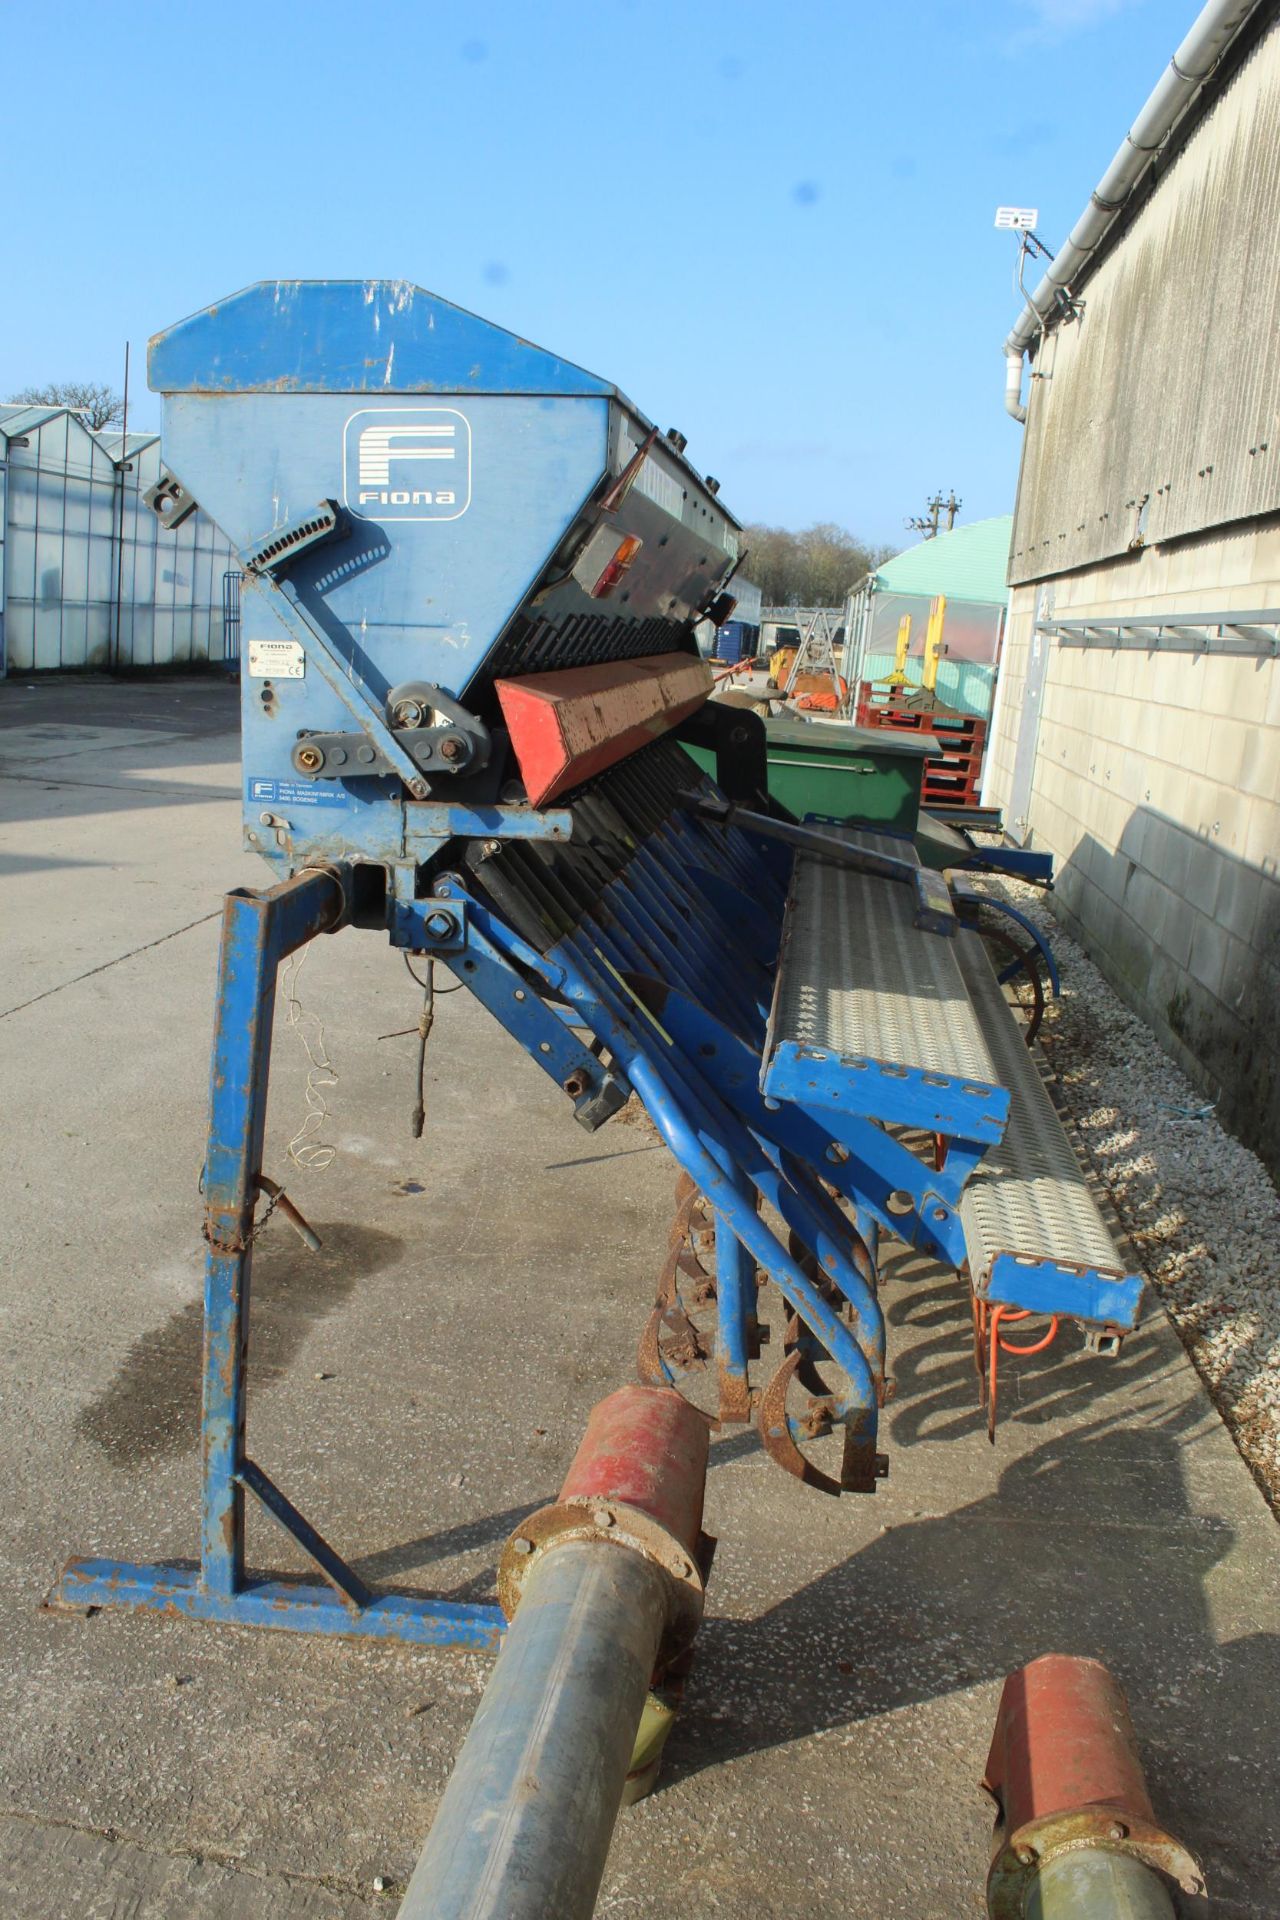 FIONA ASTRA SC 3 METRE SEED DRILL WITH MOUNTING BRACKETS FOR A KHUN POWER HARROW & ELECTRIC TRAM - Image 5 of 6